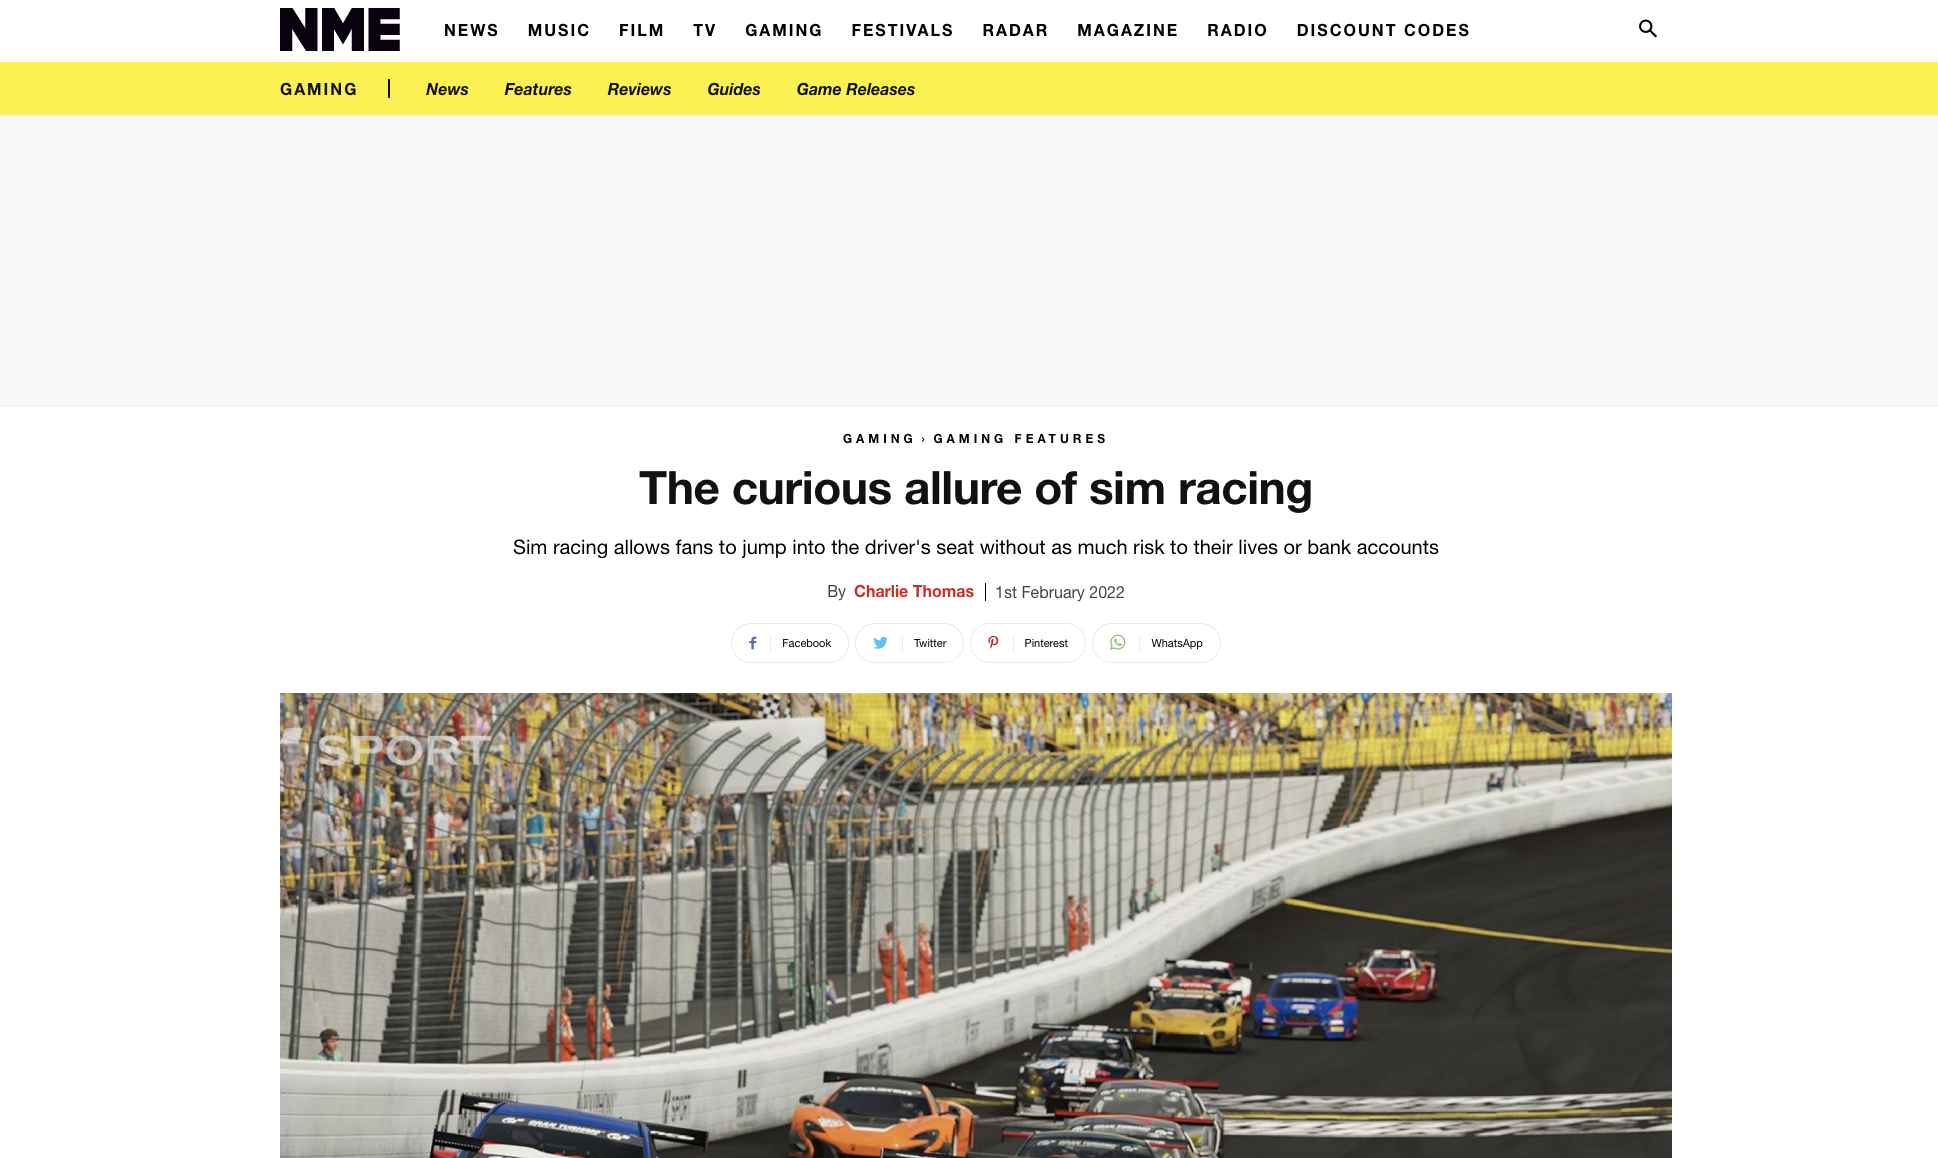 NME - The allure of sim racing